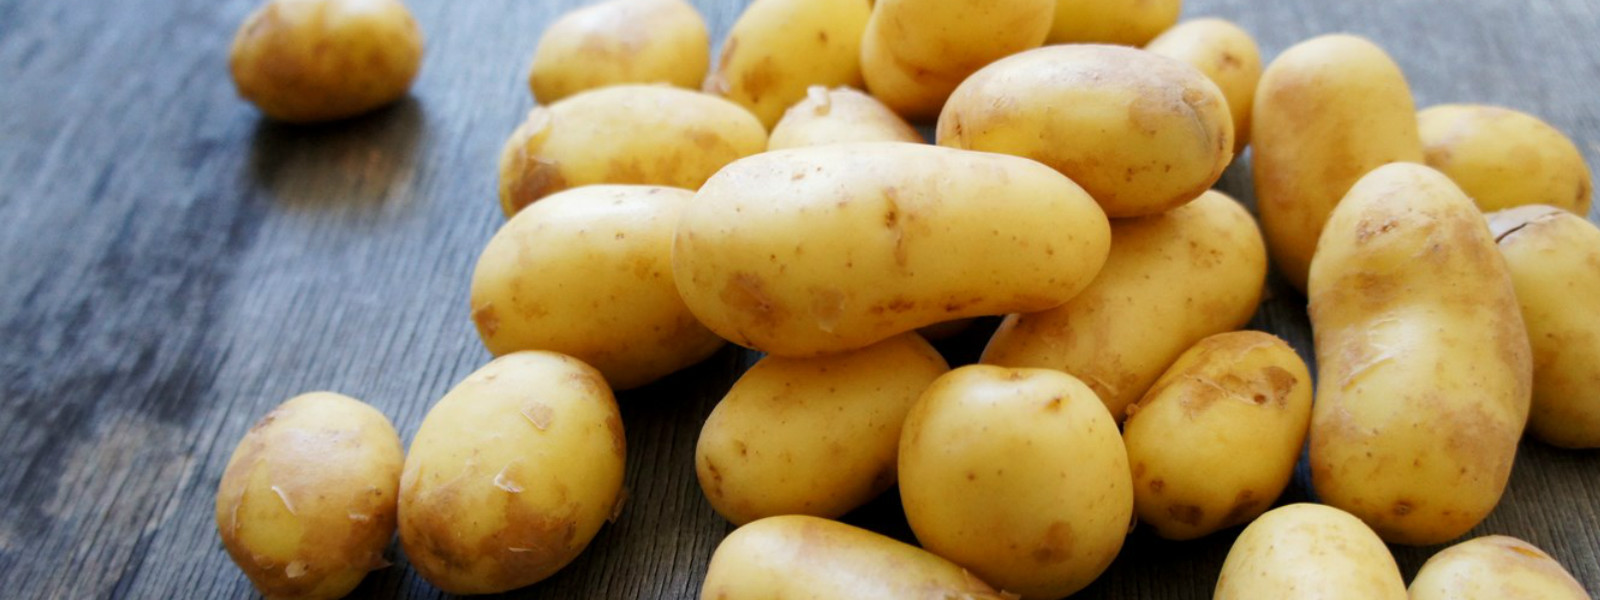 Special Excise Duty on Imported Potatoes increased